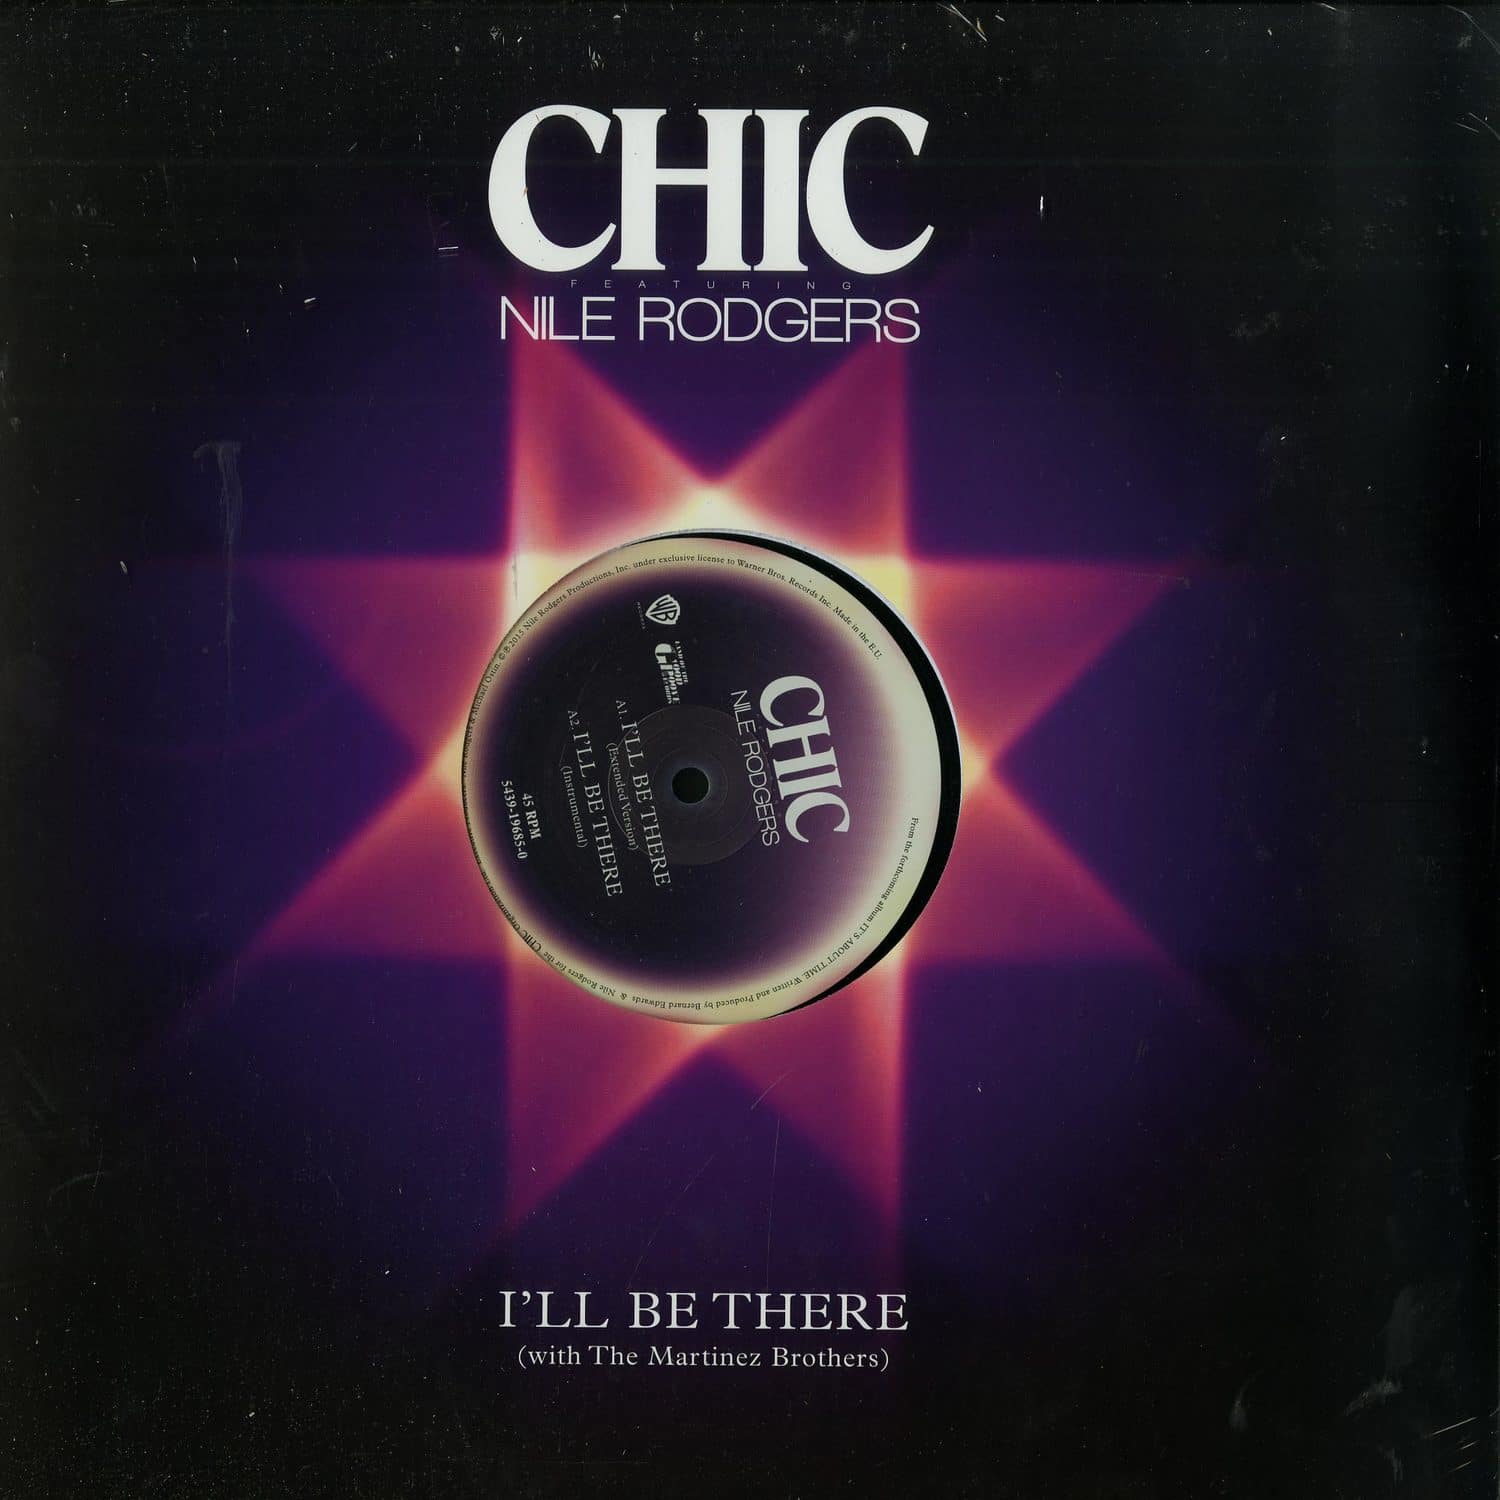 Chic - Nile Rodgers - I LL BE THERE